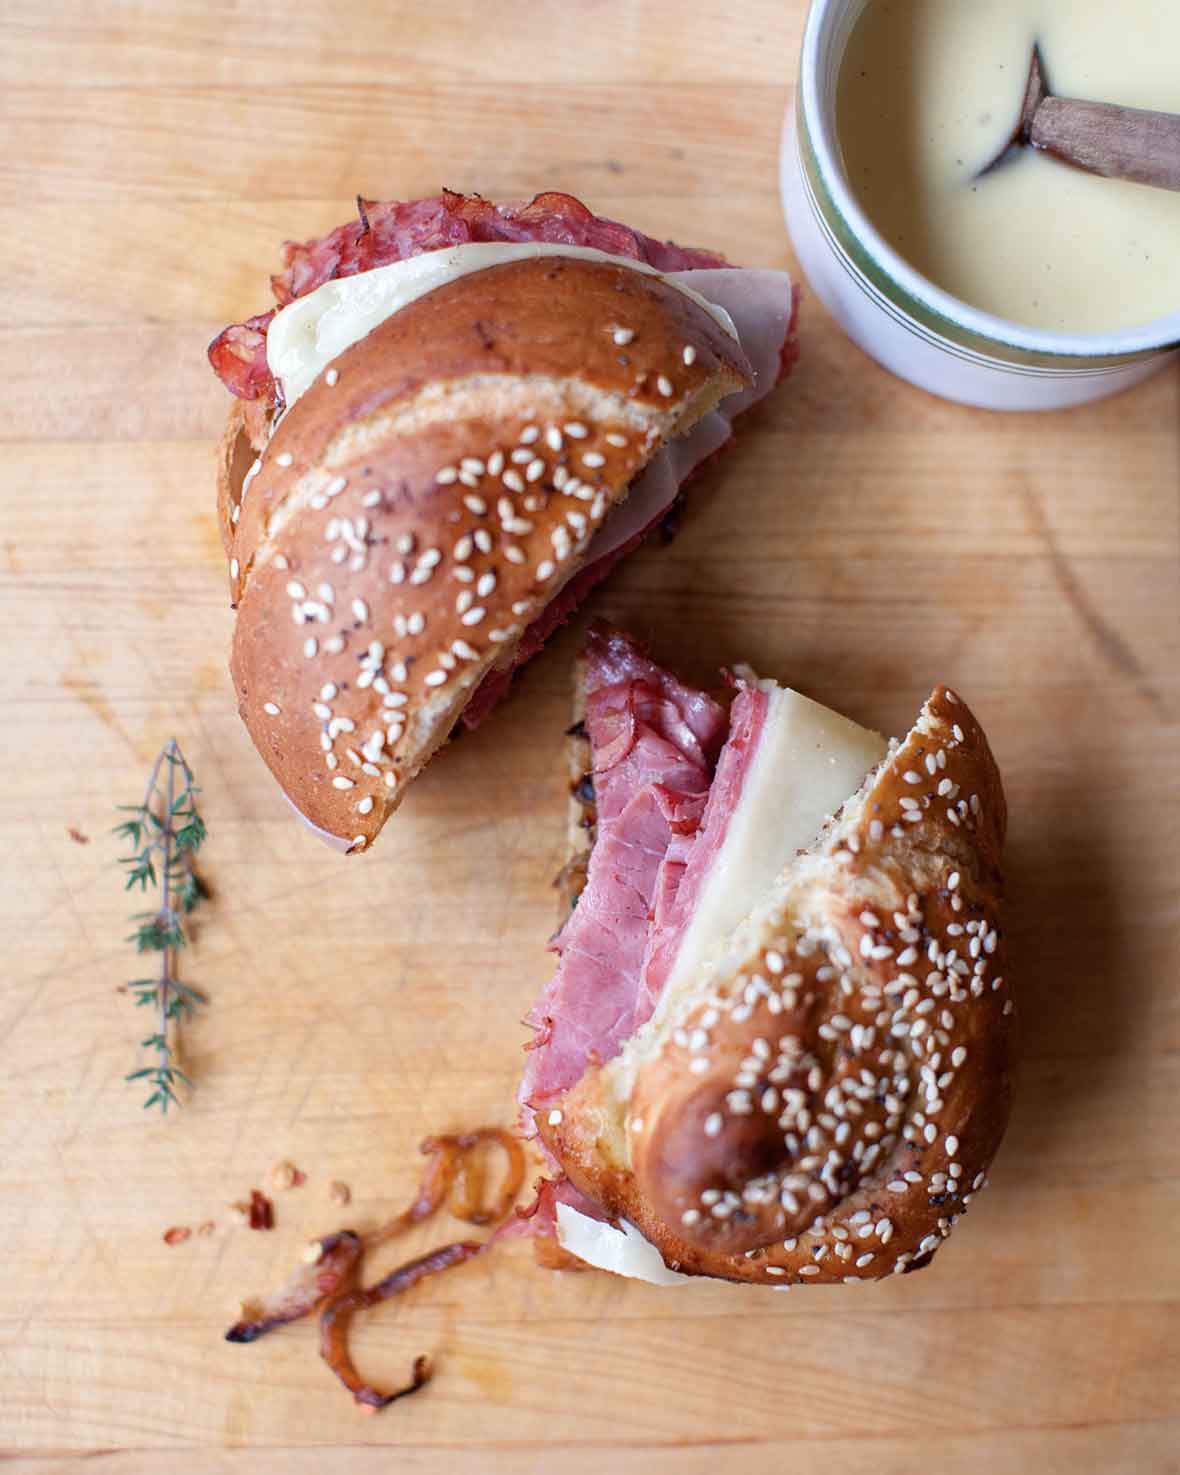 A pastrami, caramelized onion, and Gruyère sandwich on a pretzel roll sliced in half with a sprig of thyme lying beside it on a wooden cutting board.